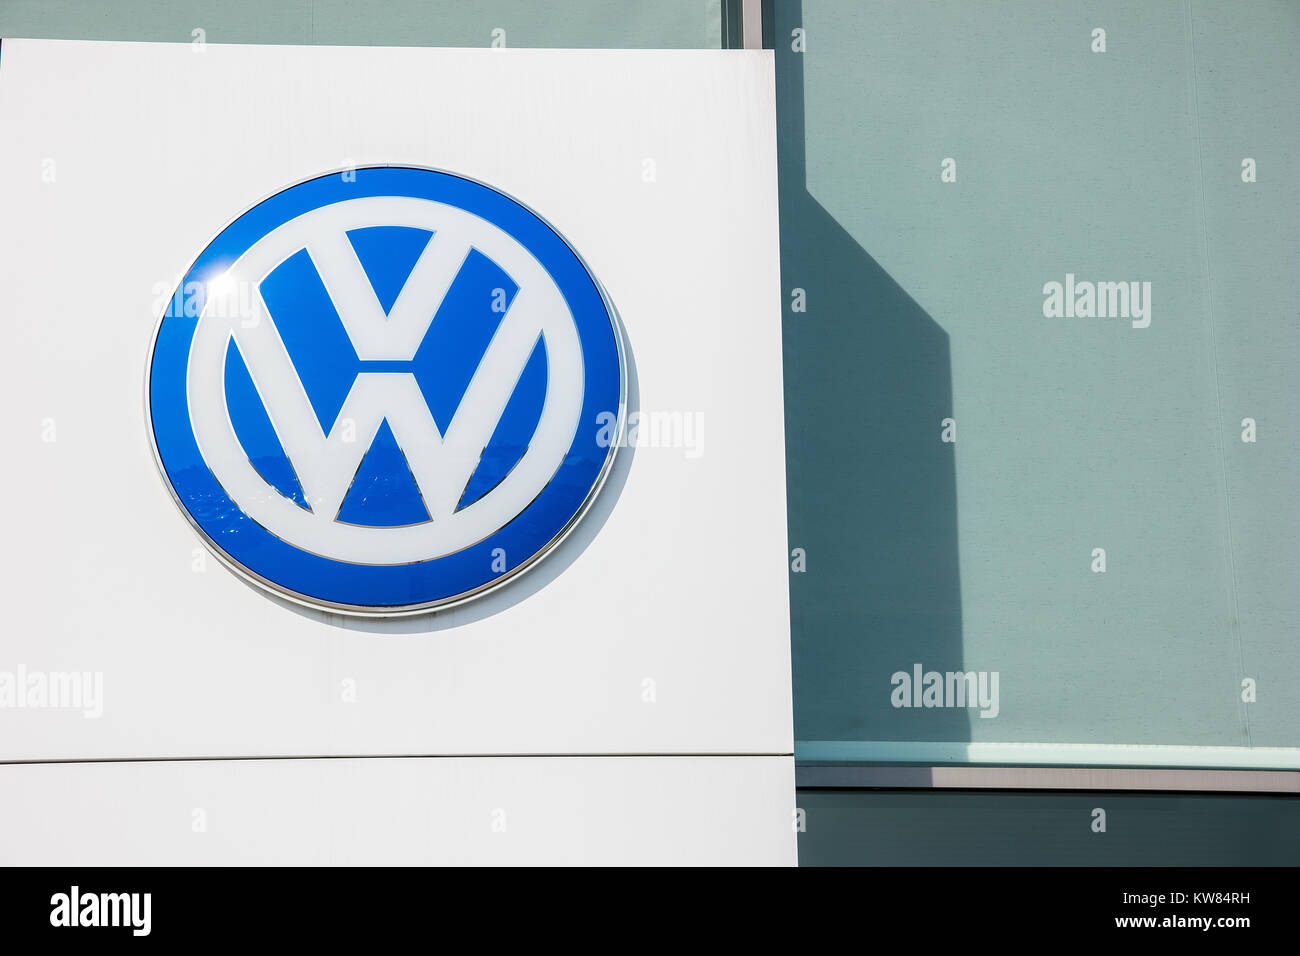 Volkswagen VW logo on a store facade. Volkswagen is a famous European car manufacturer company based on Germany. Stock Photo